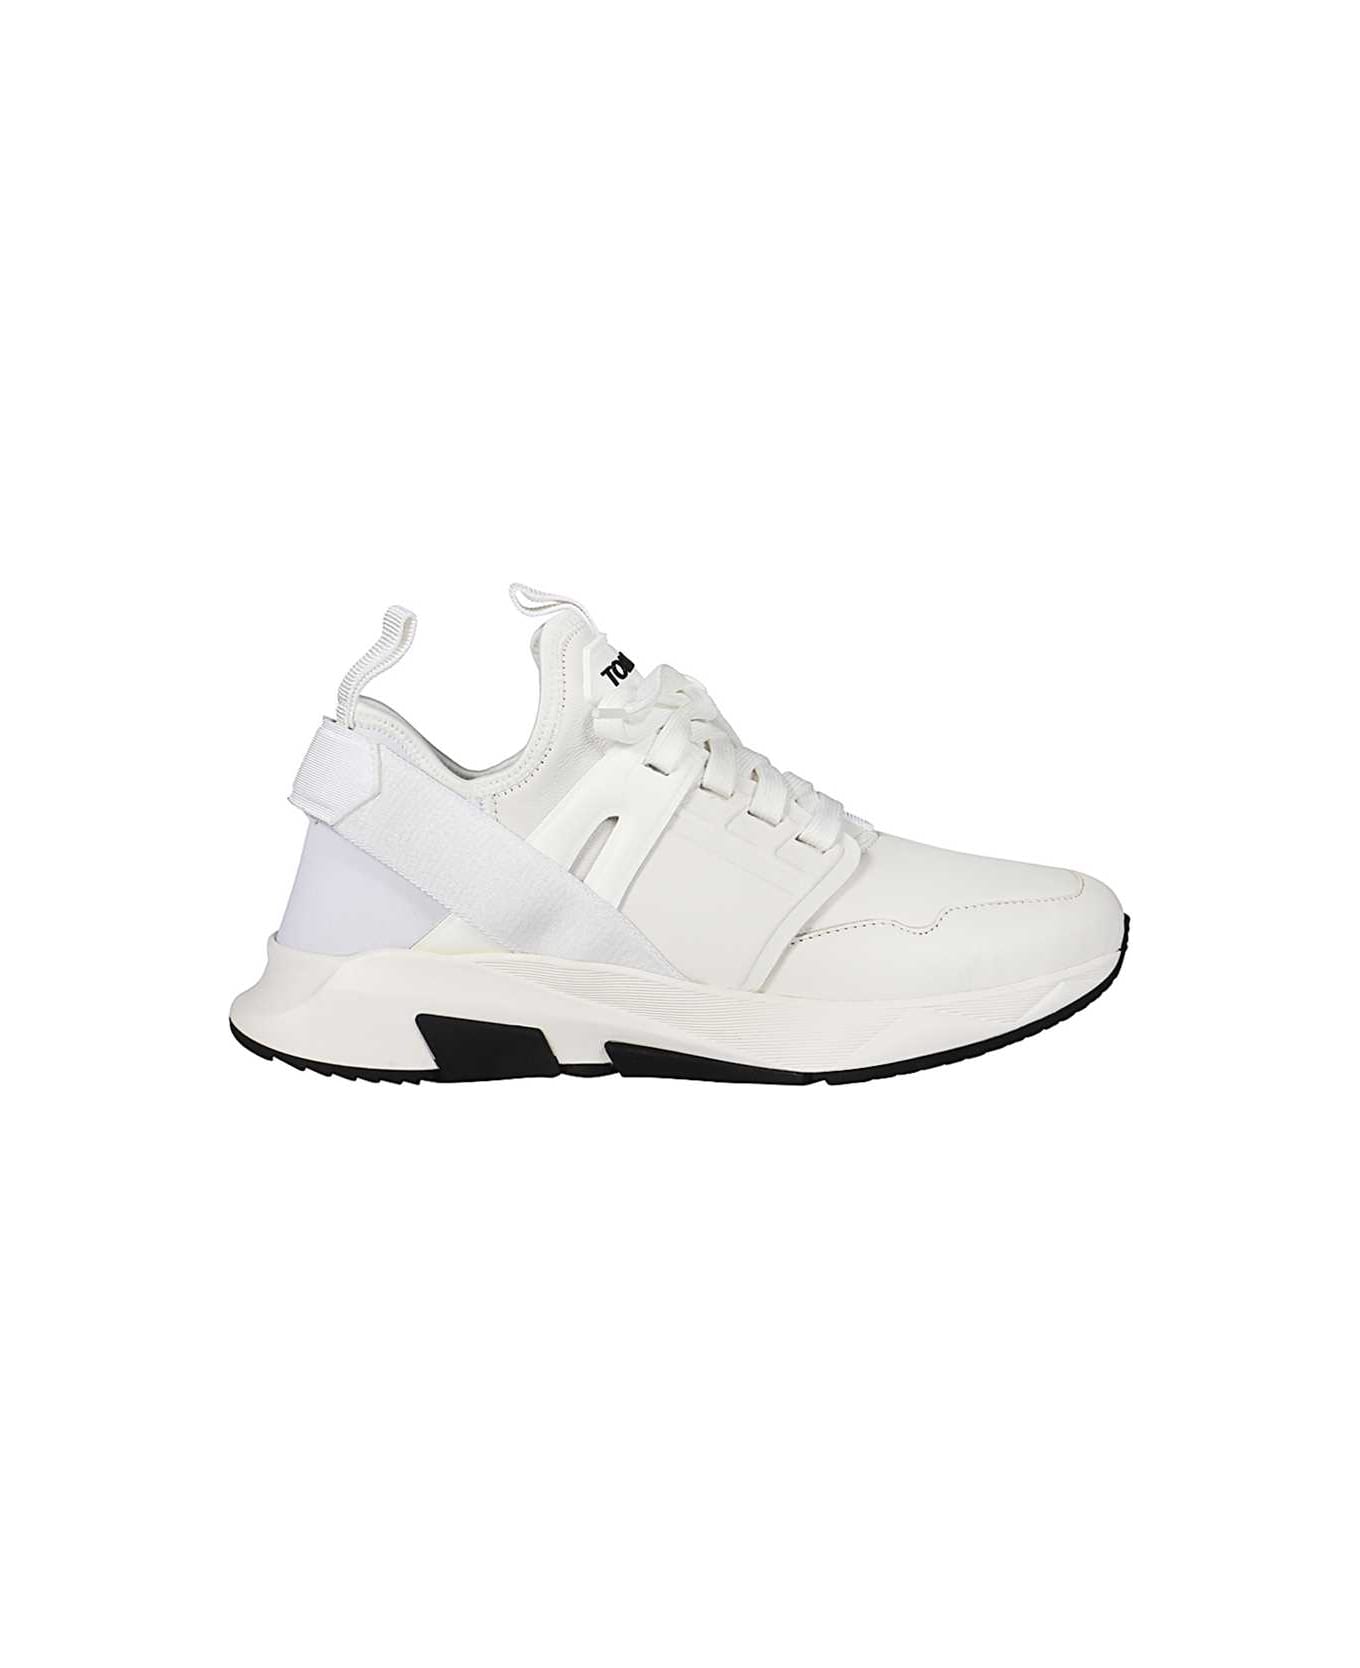 Tom Ford Jago Low-top Sneakers - White スニーカー